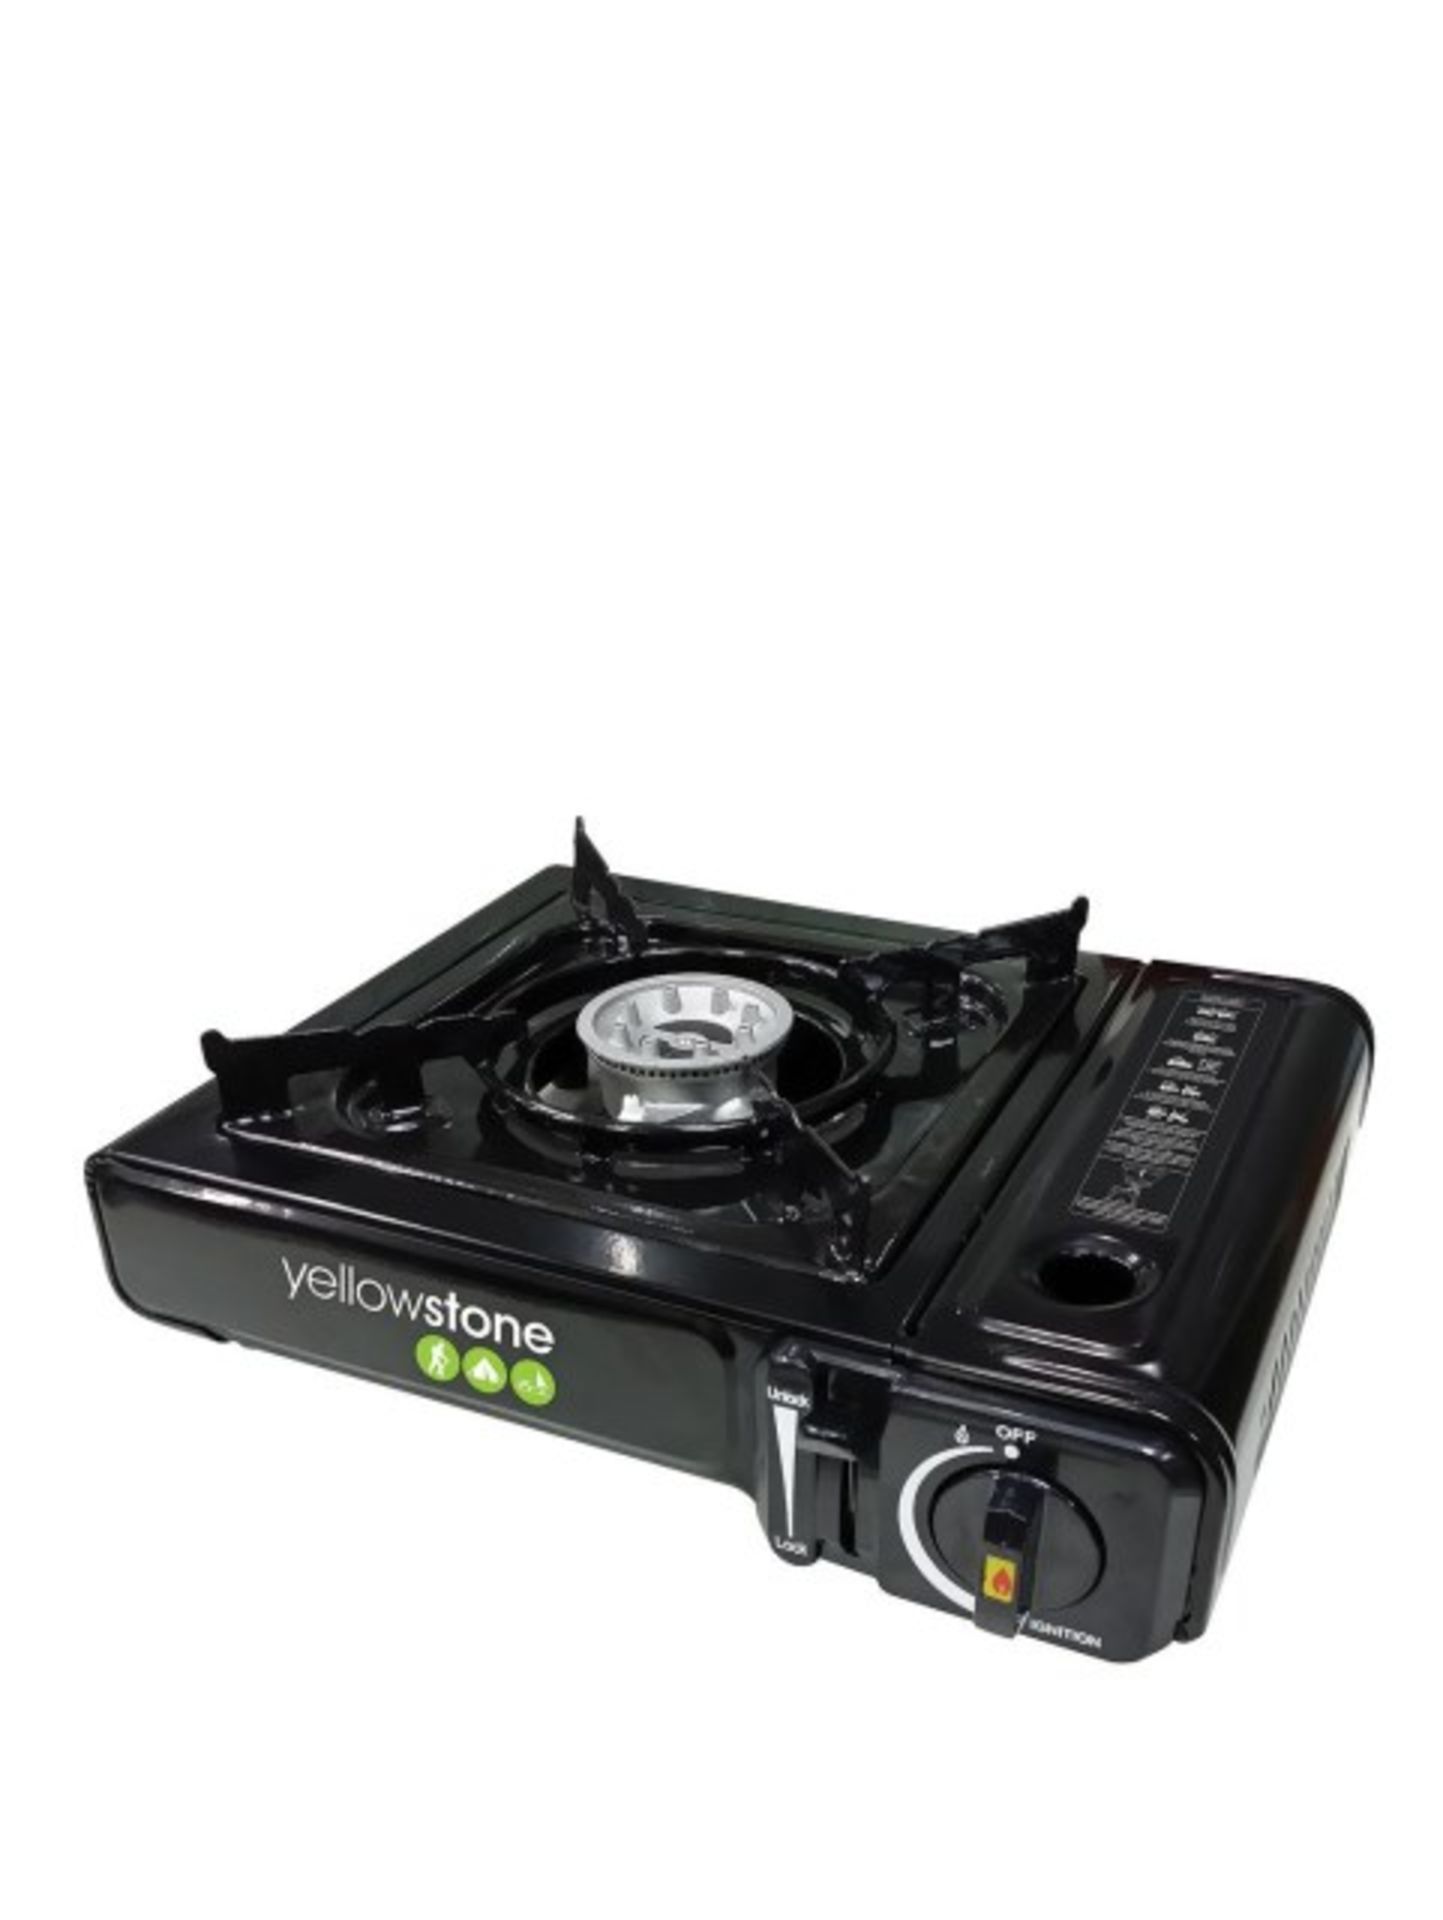 V Brand New Portable Gas Stove In Briefcase X 15 Bid price to be multiplied by Fifteen